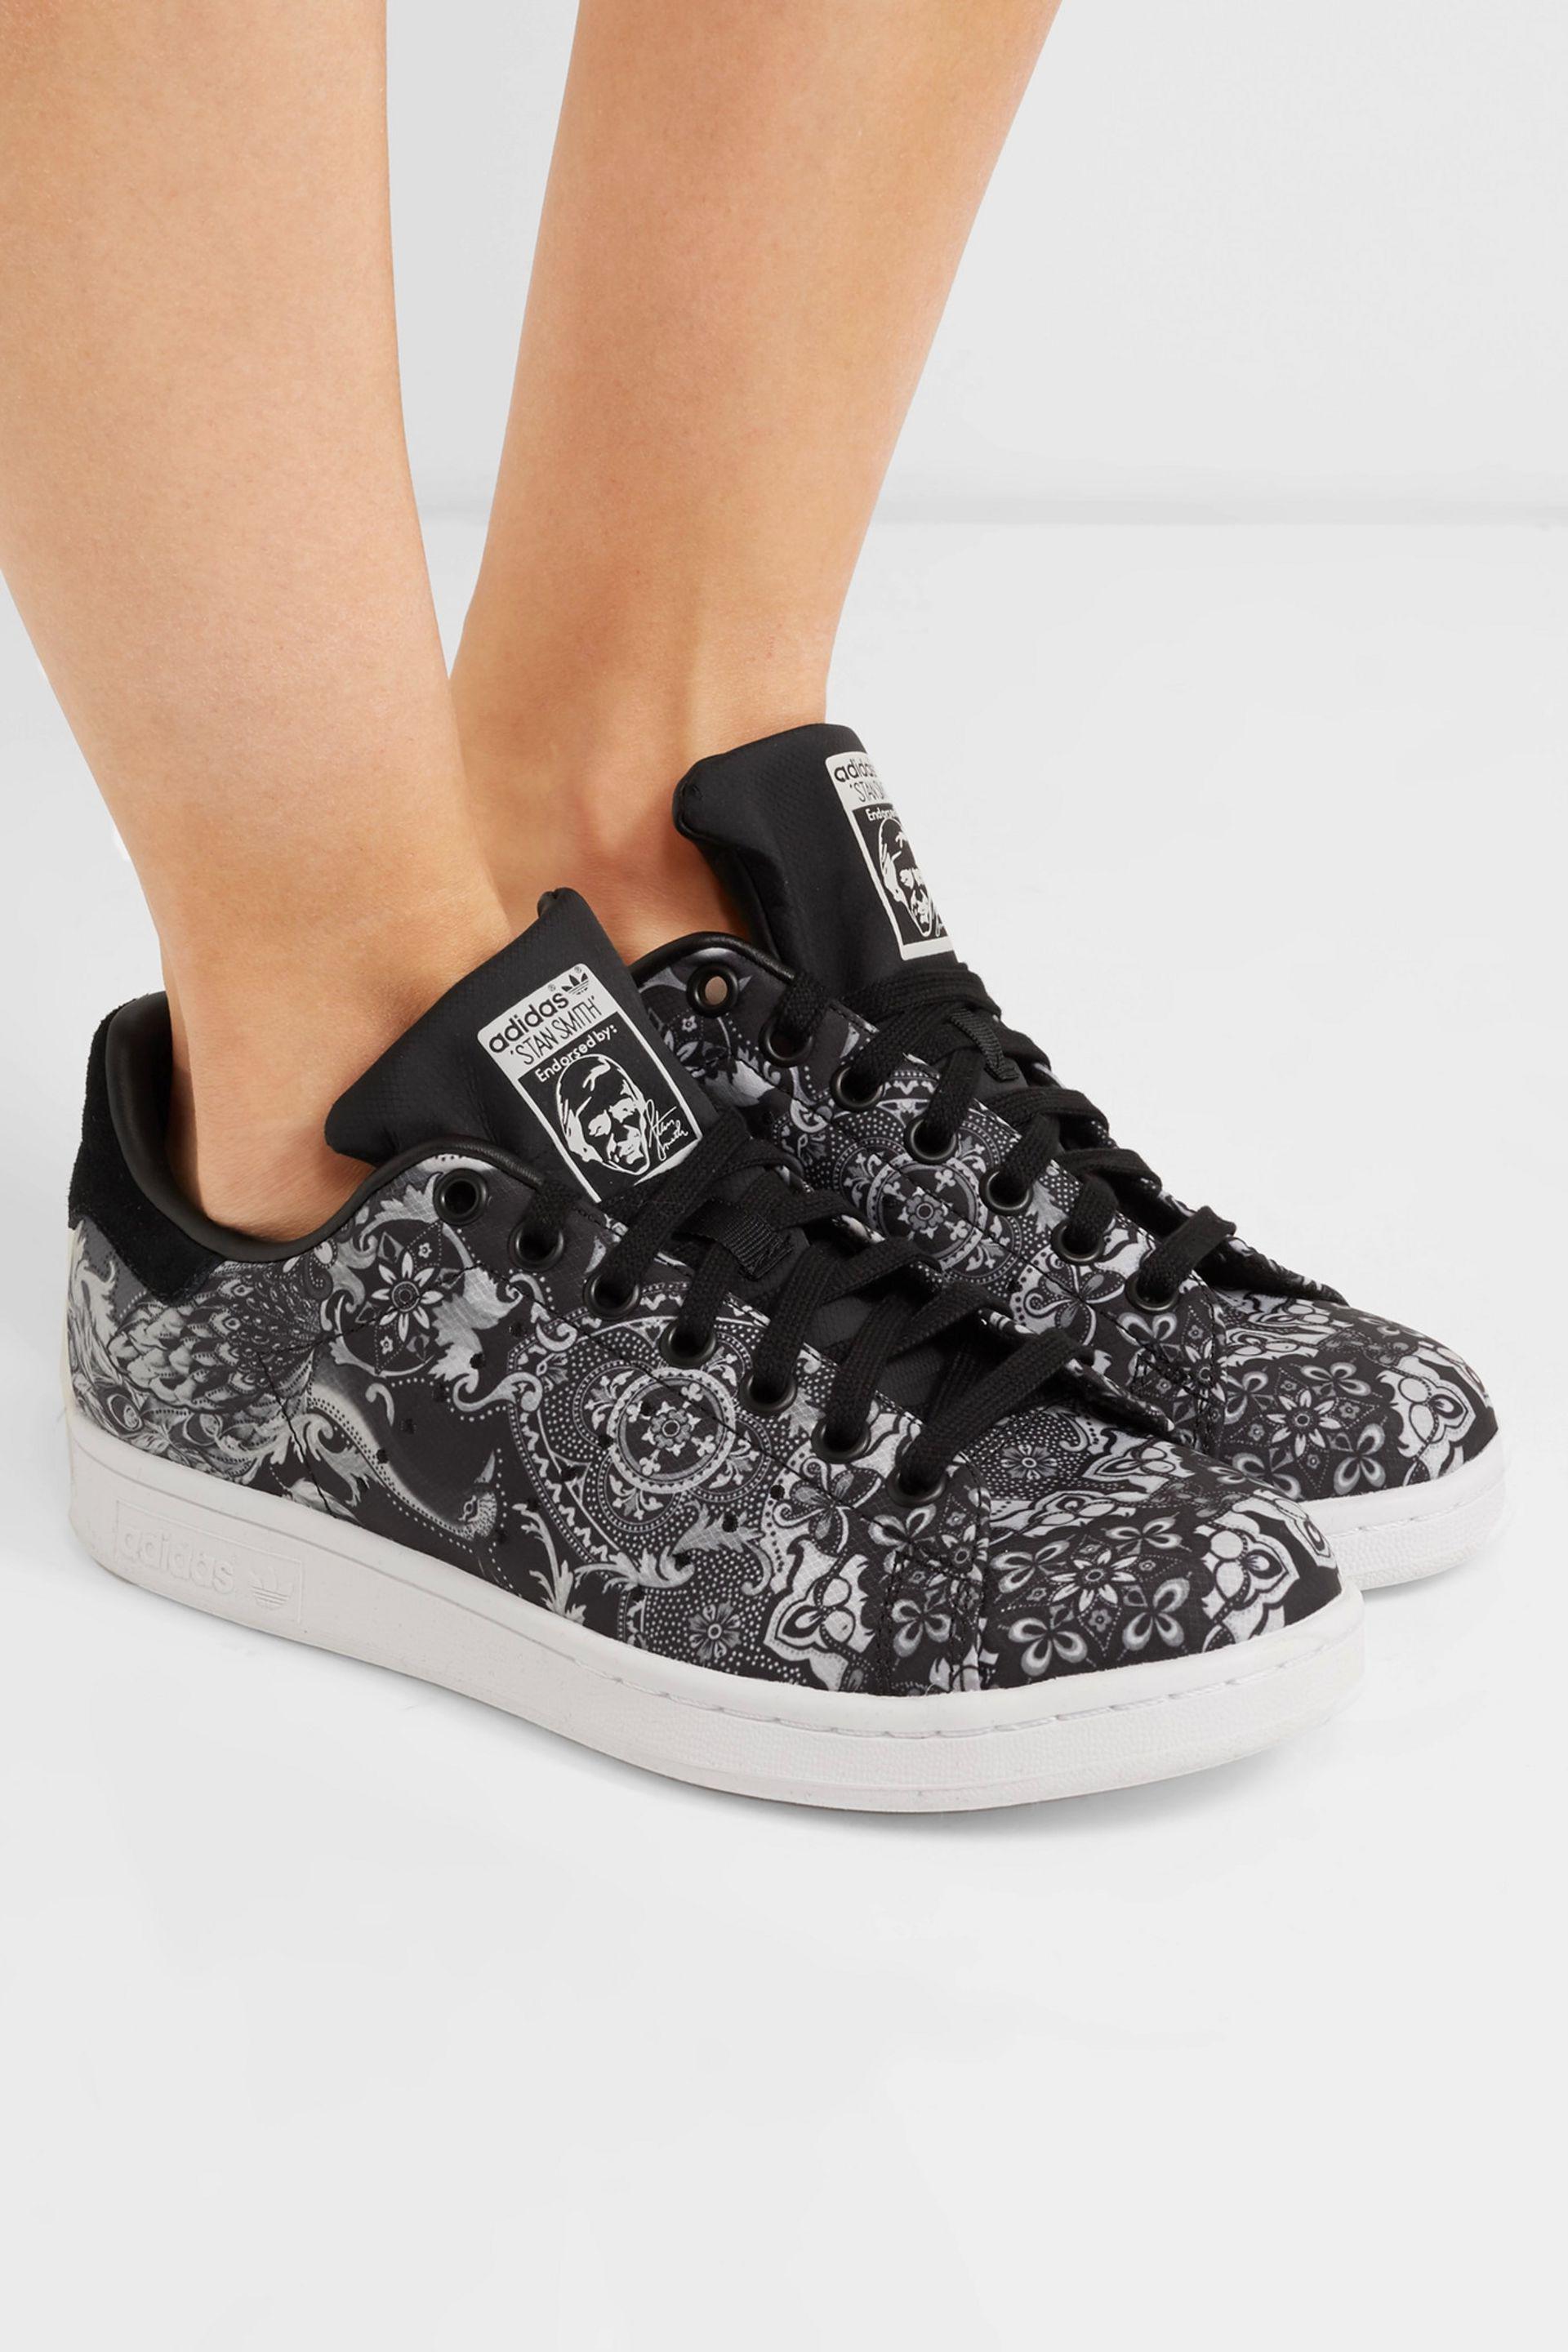 adidas Originals Stan Smith Paisley-print Shell Sneakers in Black | Lyst UK